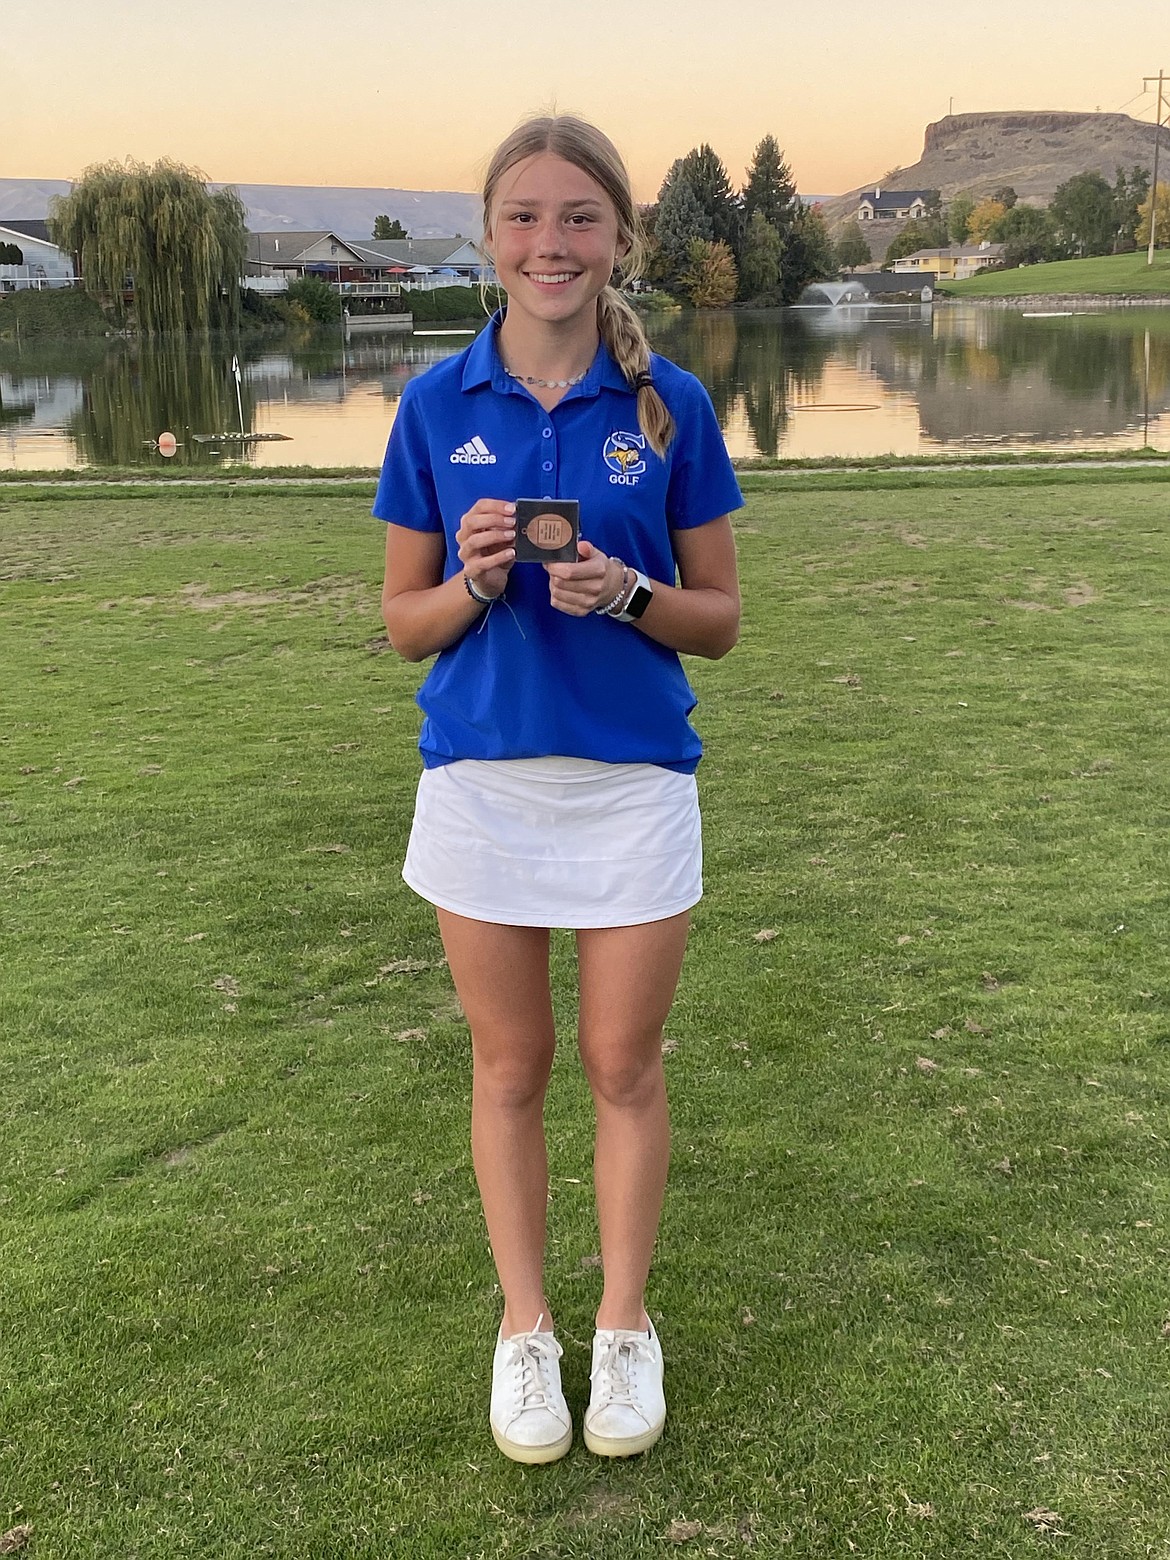 Courtesy photo
Coeur d'Alene High sophomore Stella Dietz finished eighth in the state 5A golf tournament at Lewiston Country Club on Saturday.